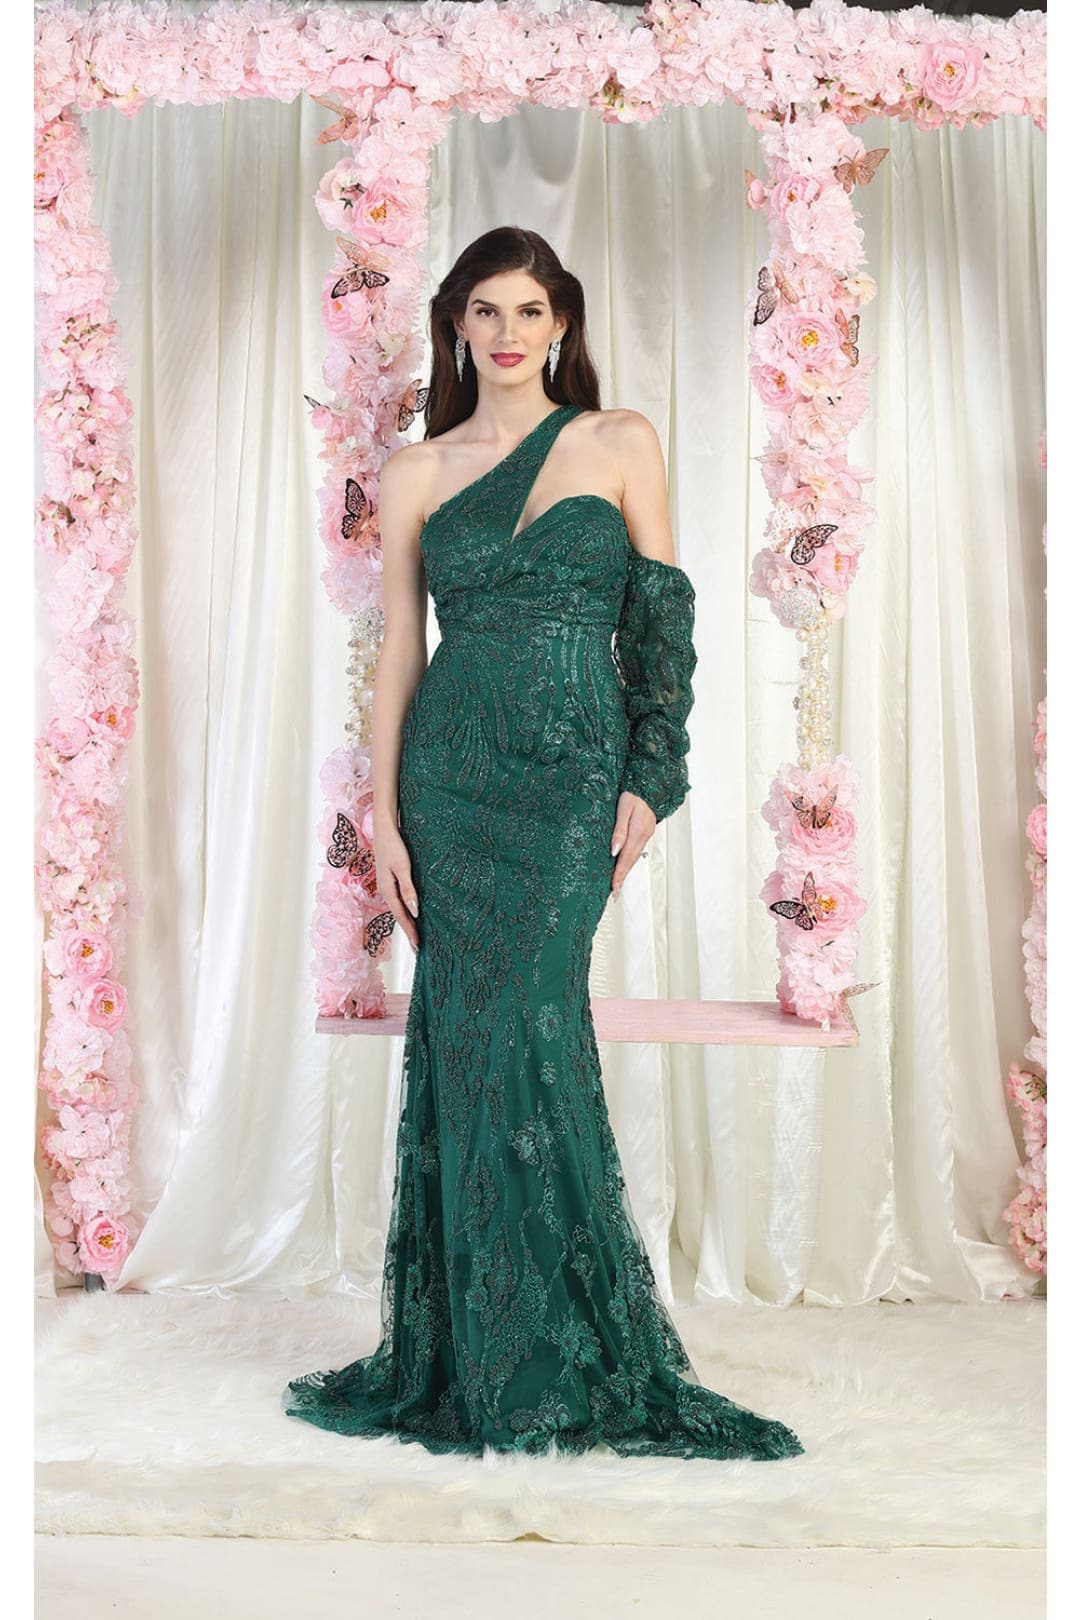 Royal Queen RQ7997 Arm Sleeve Prom Gown - HUNTER GREEN / 4 - Dress